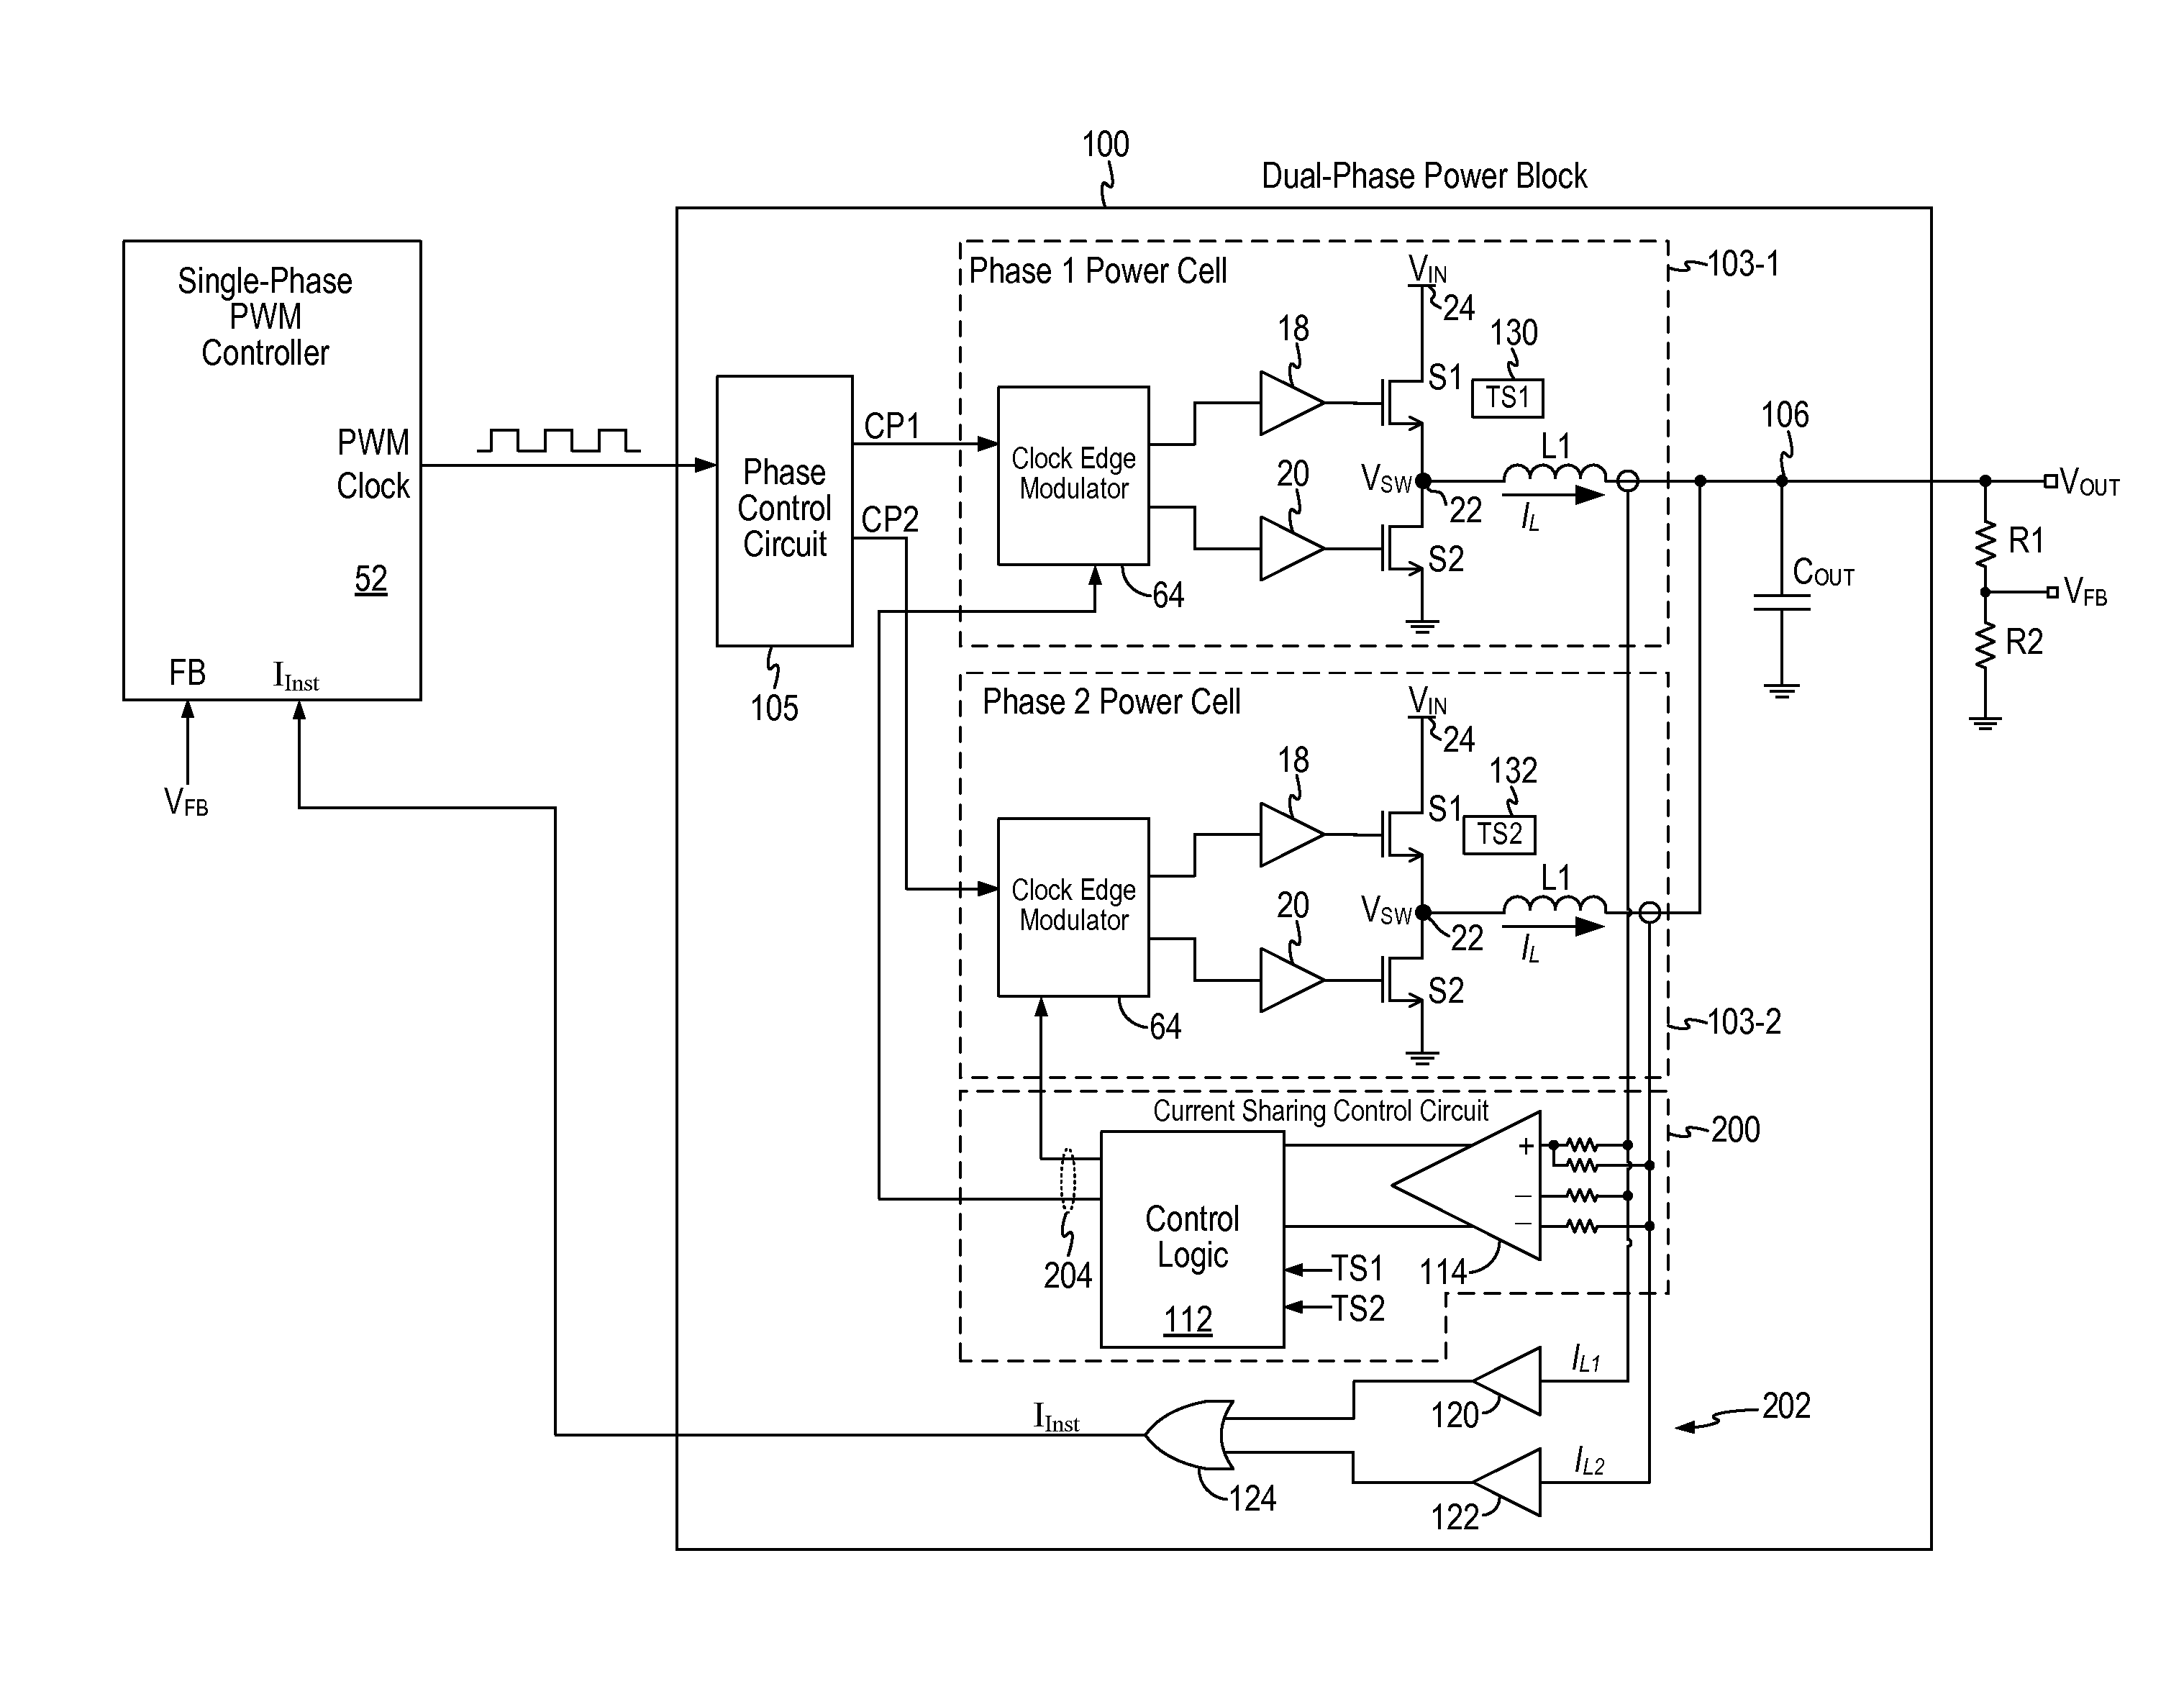 Multi-Phase Power Block For a Switching Regulator for use with a Single-Phase PWM Controller